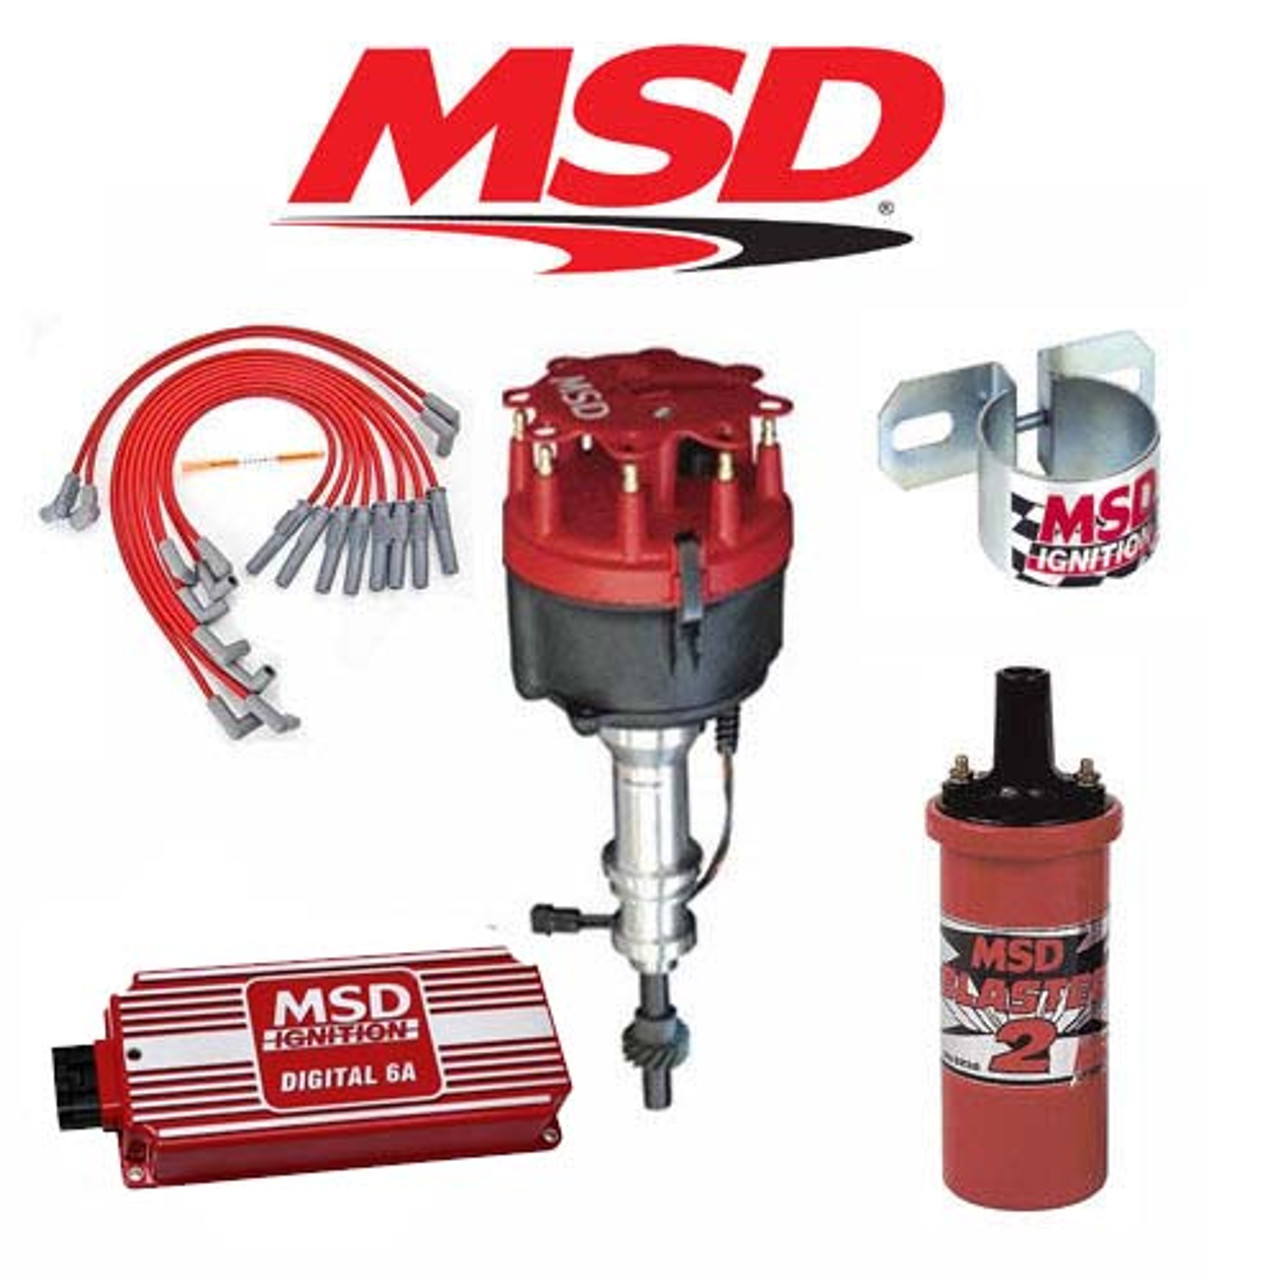 MSD 90141 Ignition Kit Digital 6A/Distributor/Wires/Coil Ford 351C-M/400/429/460